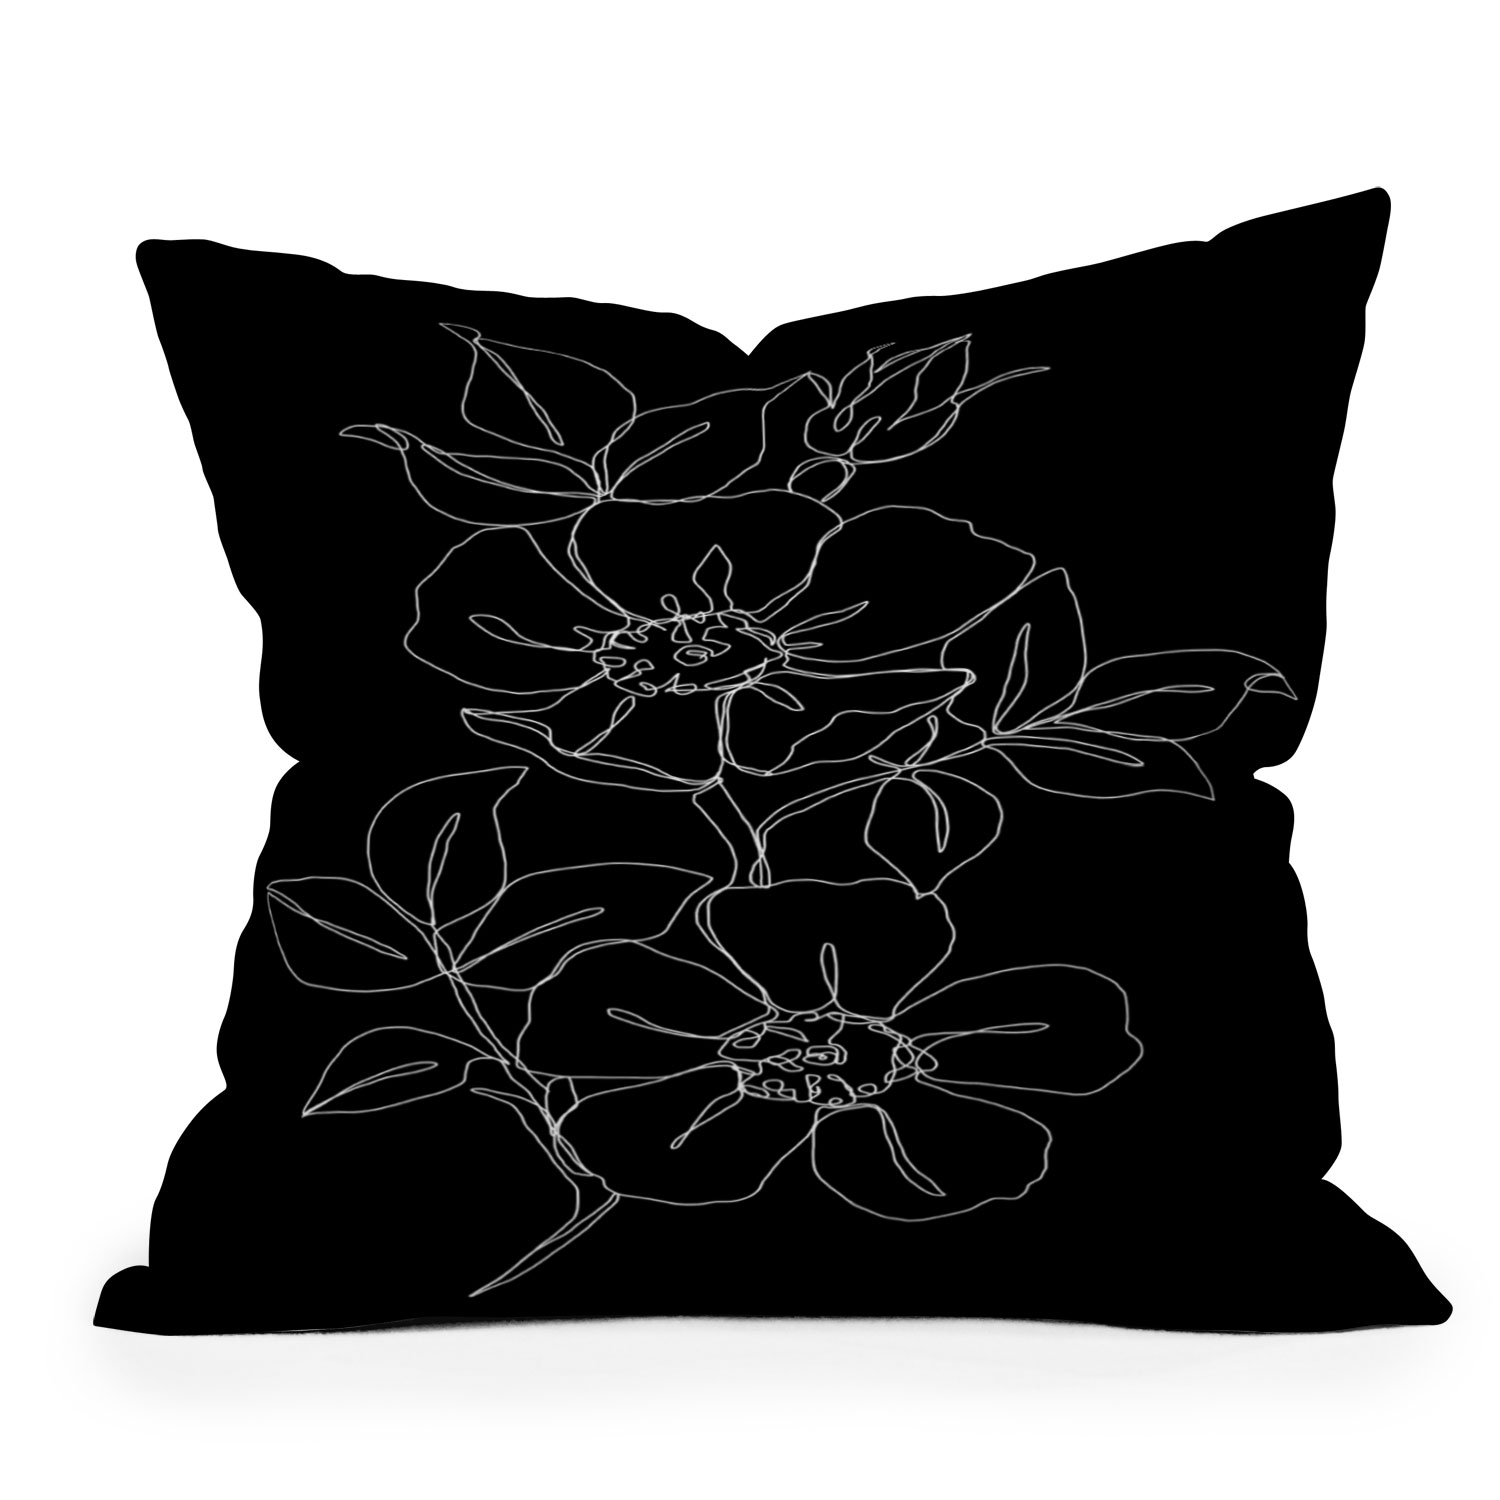 Botanical Illustration by The Colour Study - Indoor Throw Pillow 20" x 20" Cover Only - Image 0